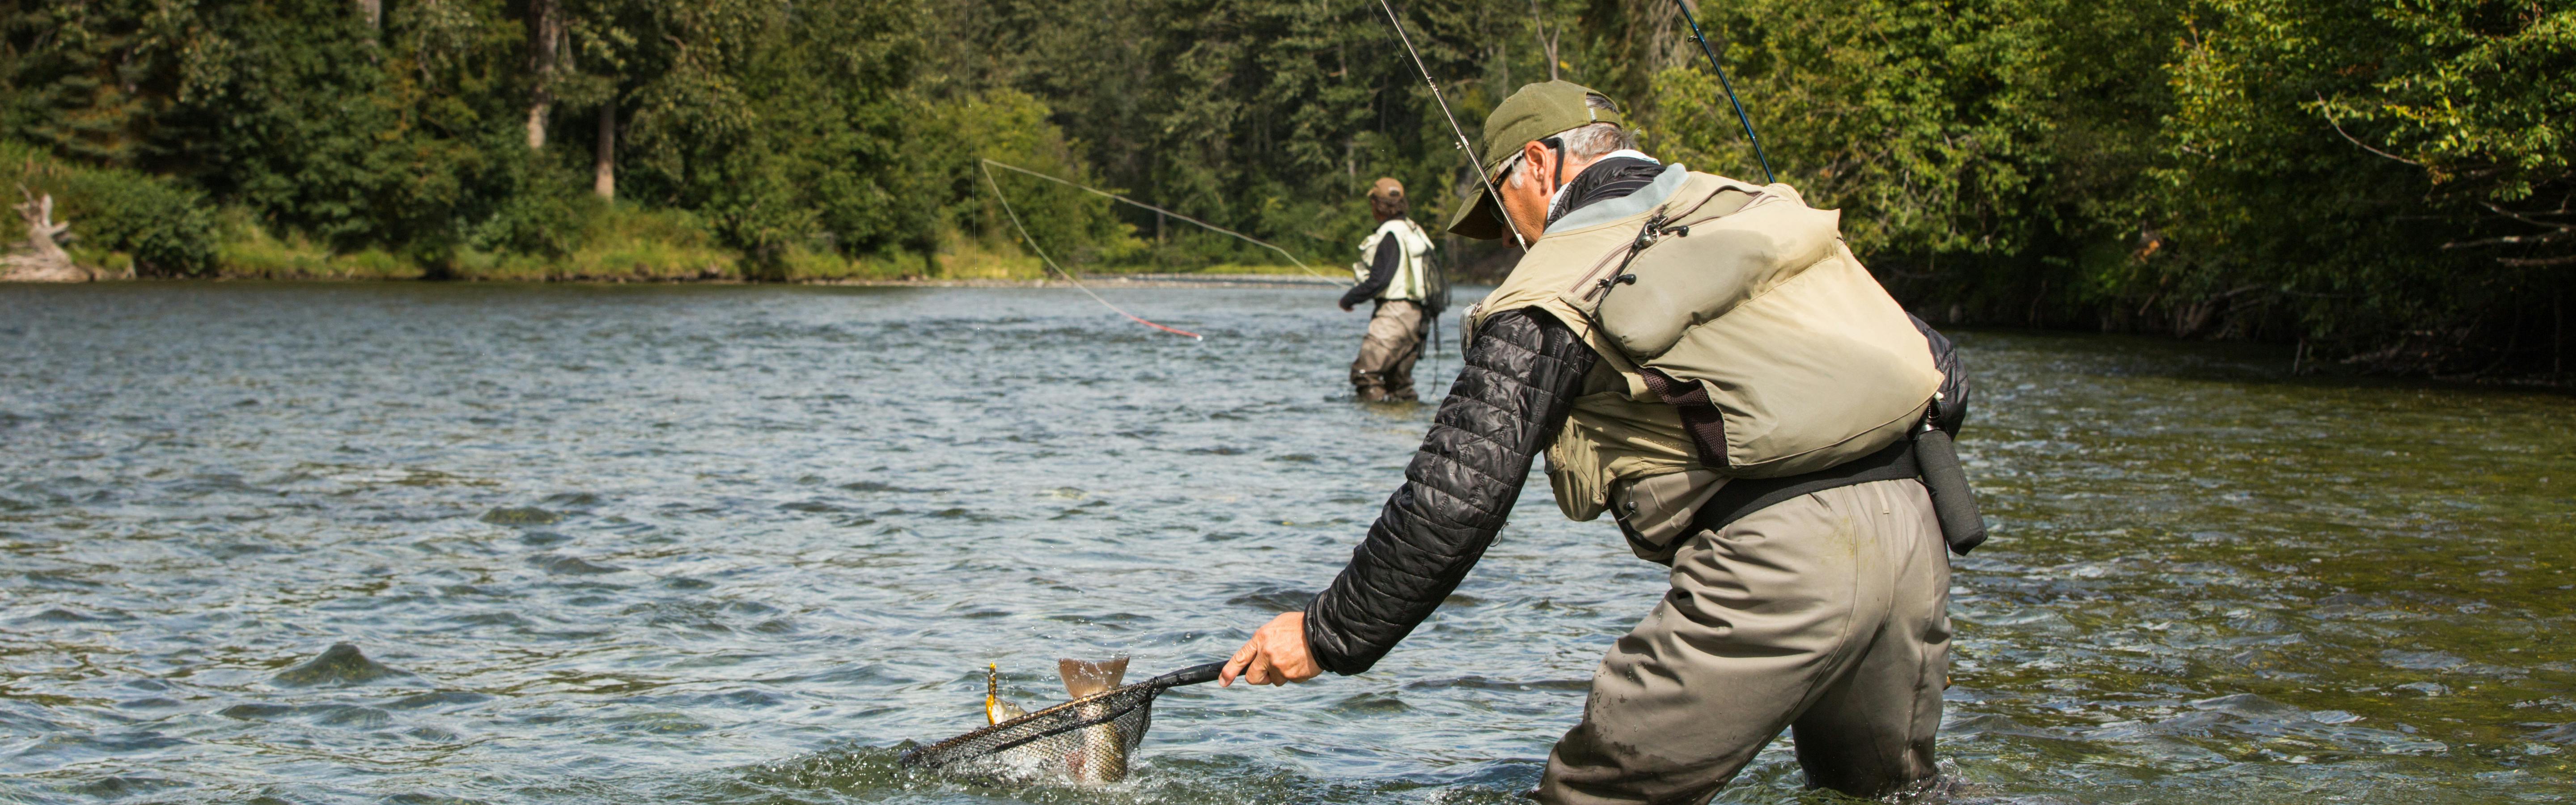 Top Fishing Clothing Brands